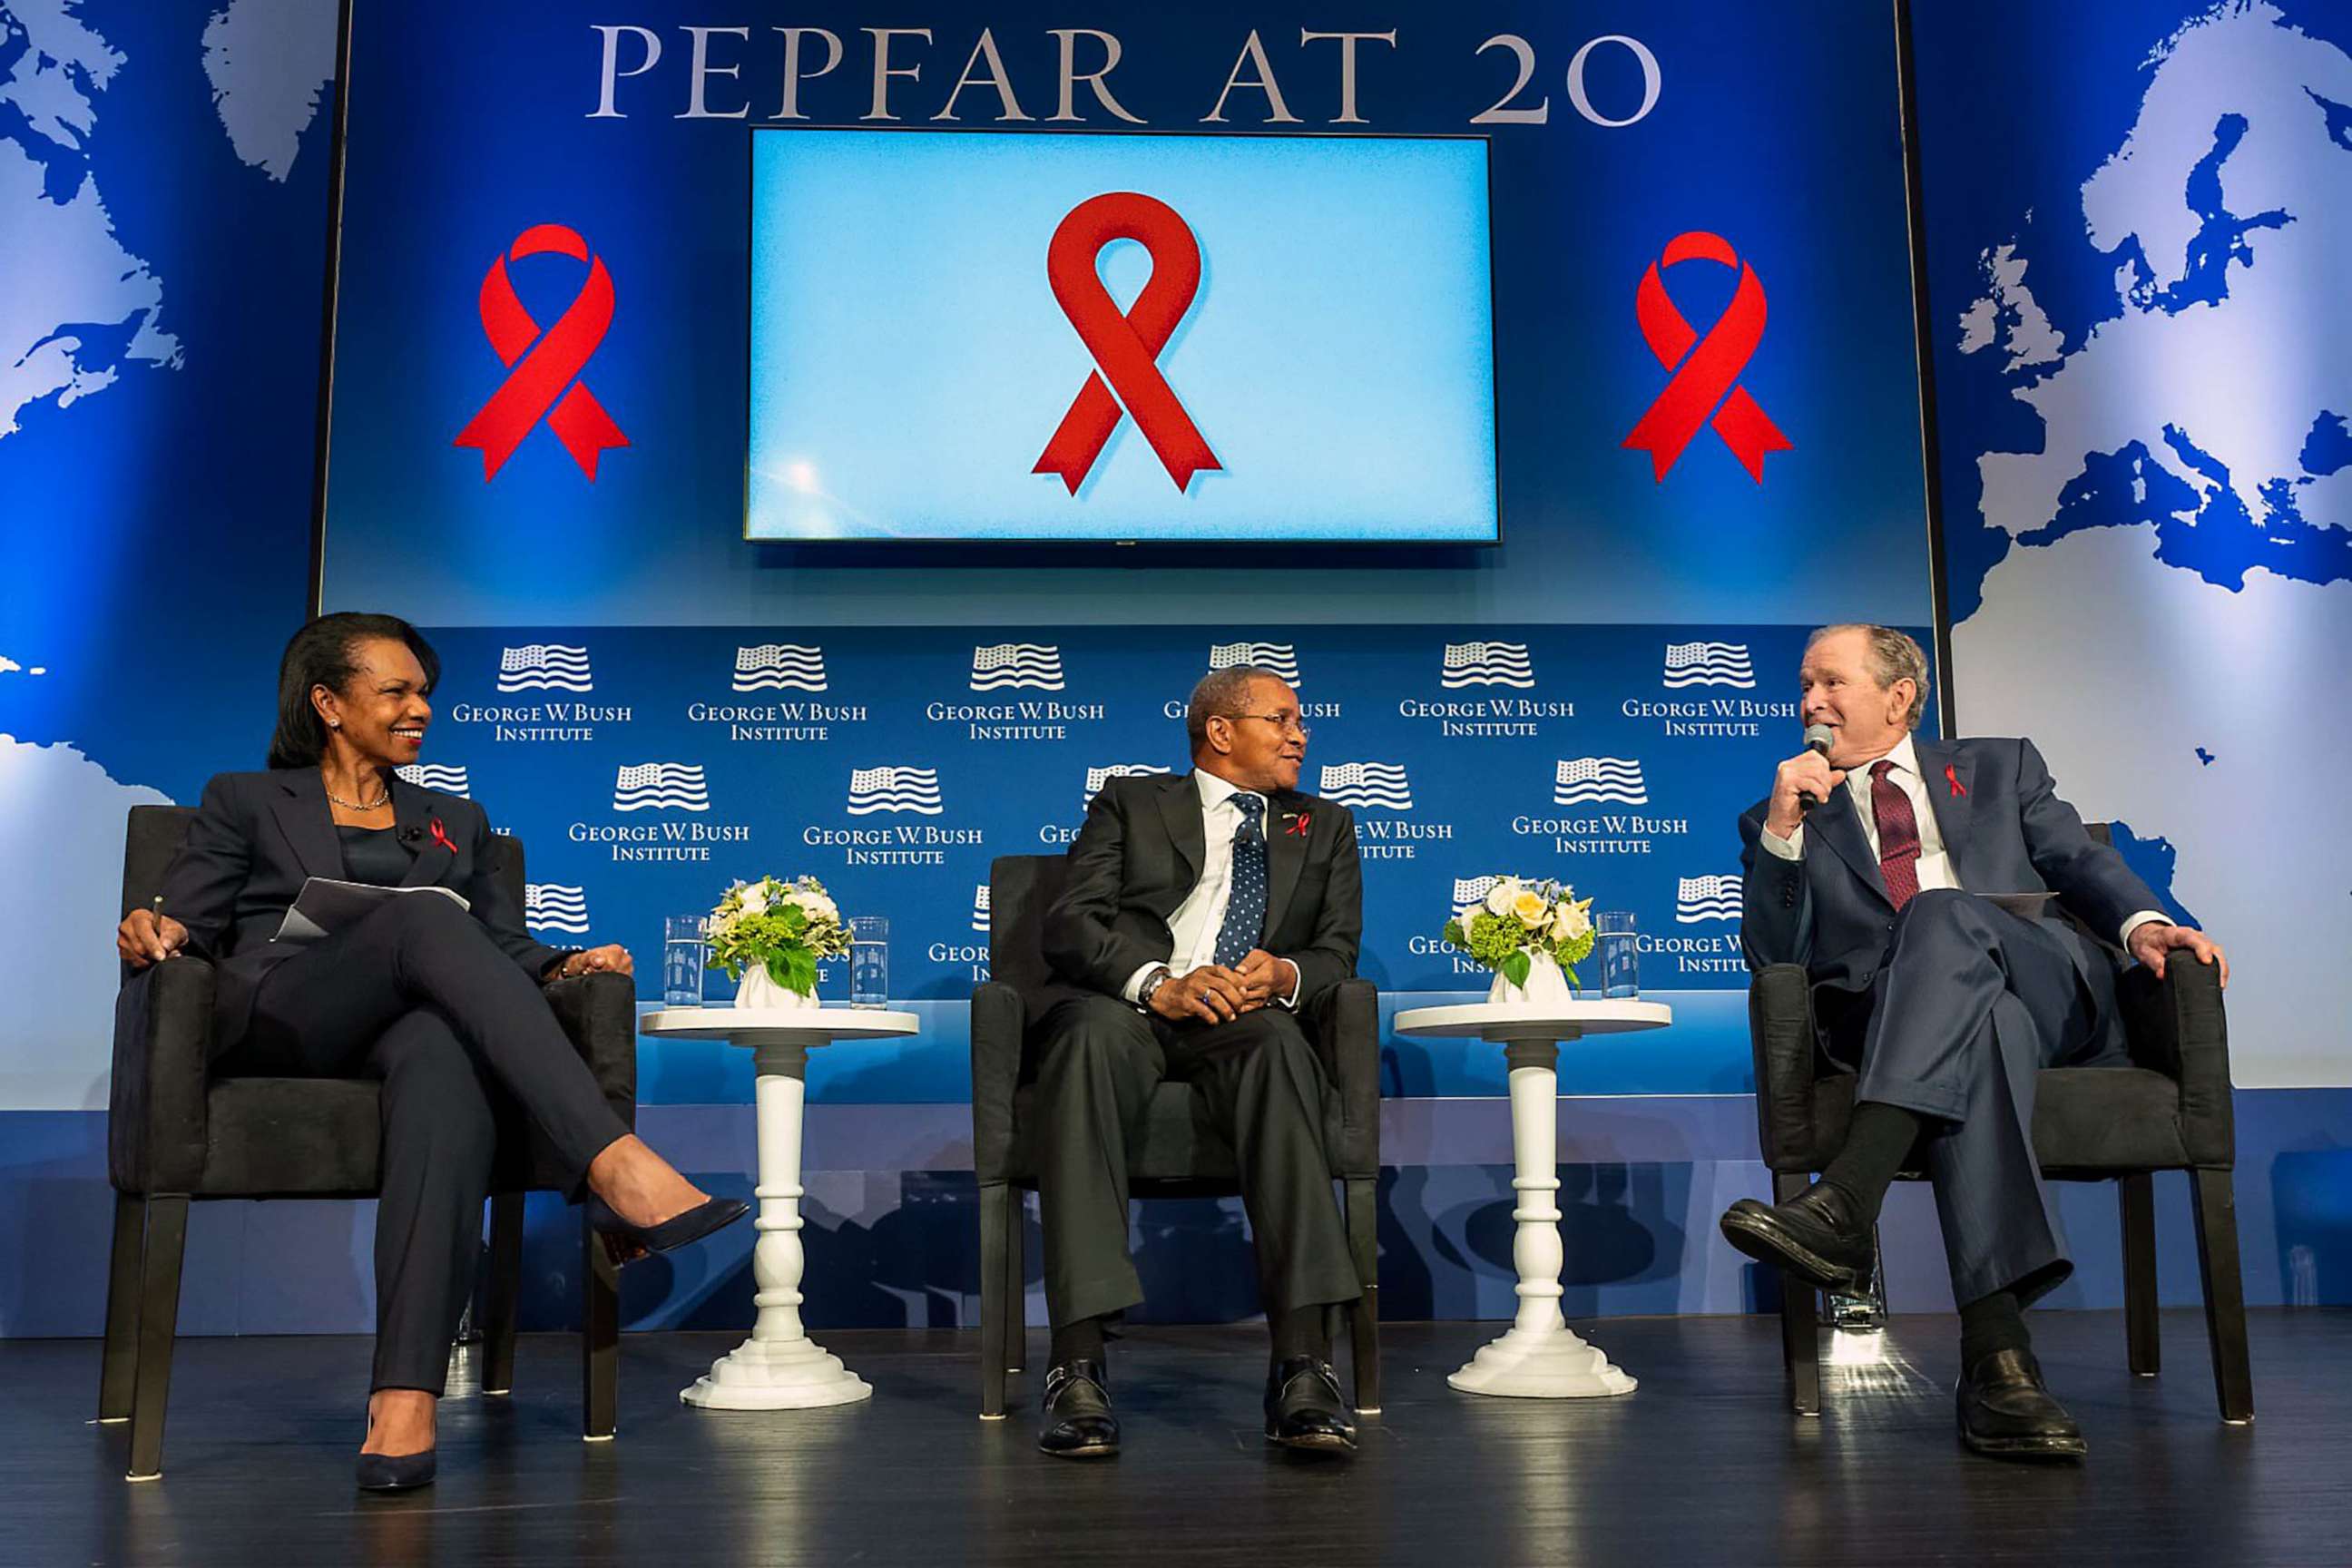 PHOTO: President George W. Bush, former President of Tanzania Dr. Jakaya Mrisho Kikwete, and 66th U.S. Secretary of State Dr. Condoleezza Rice discuss the inception of PEPFAR and its legacy at the PEPFAR at 20 event in Washington, D.C. on Feb. 24, 2023.